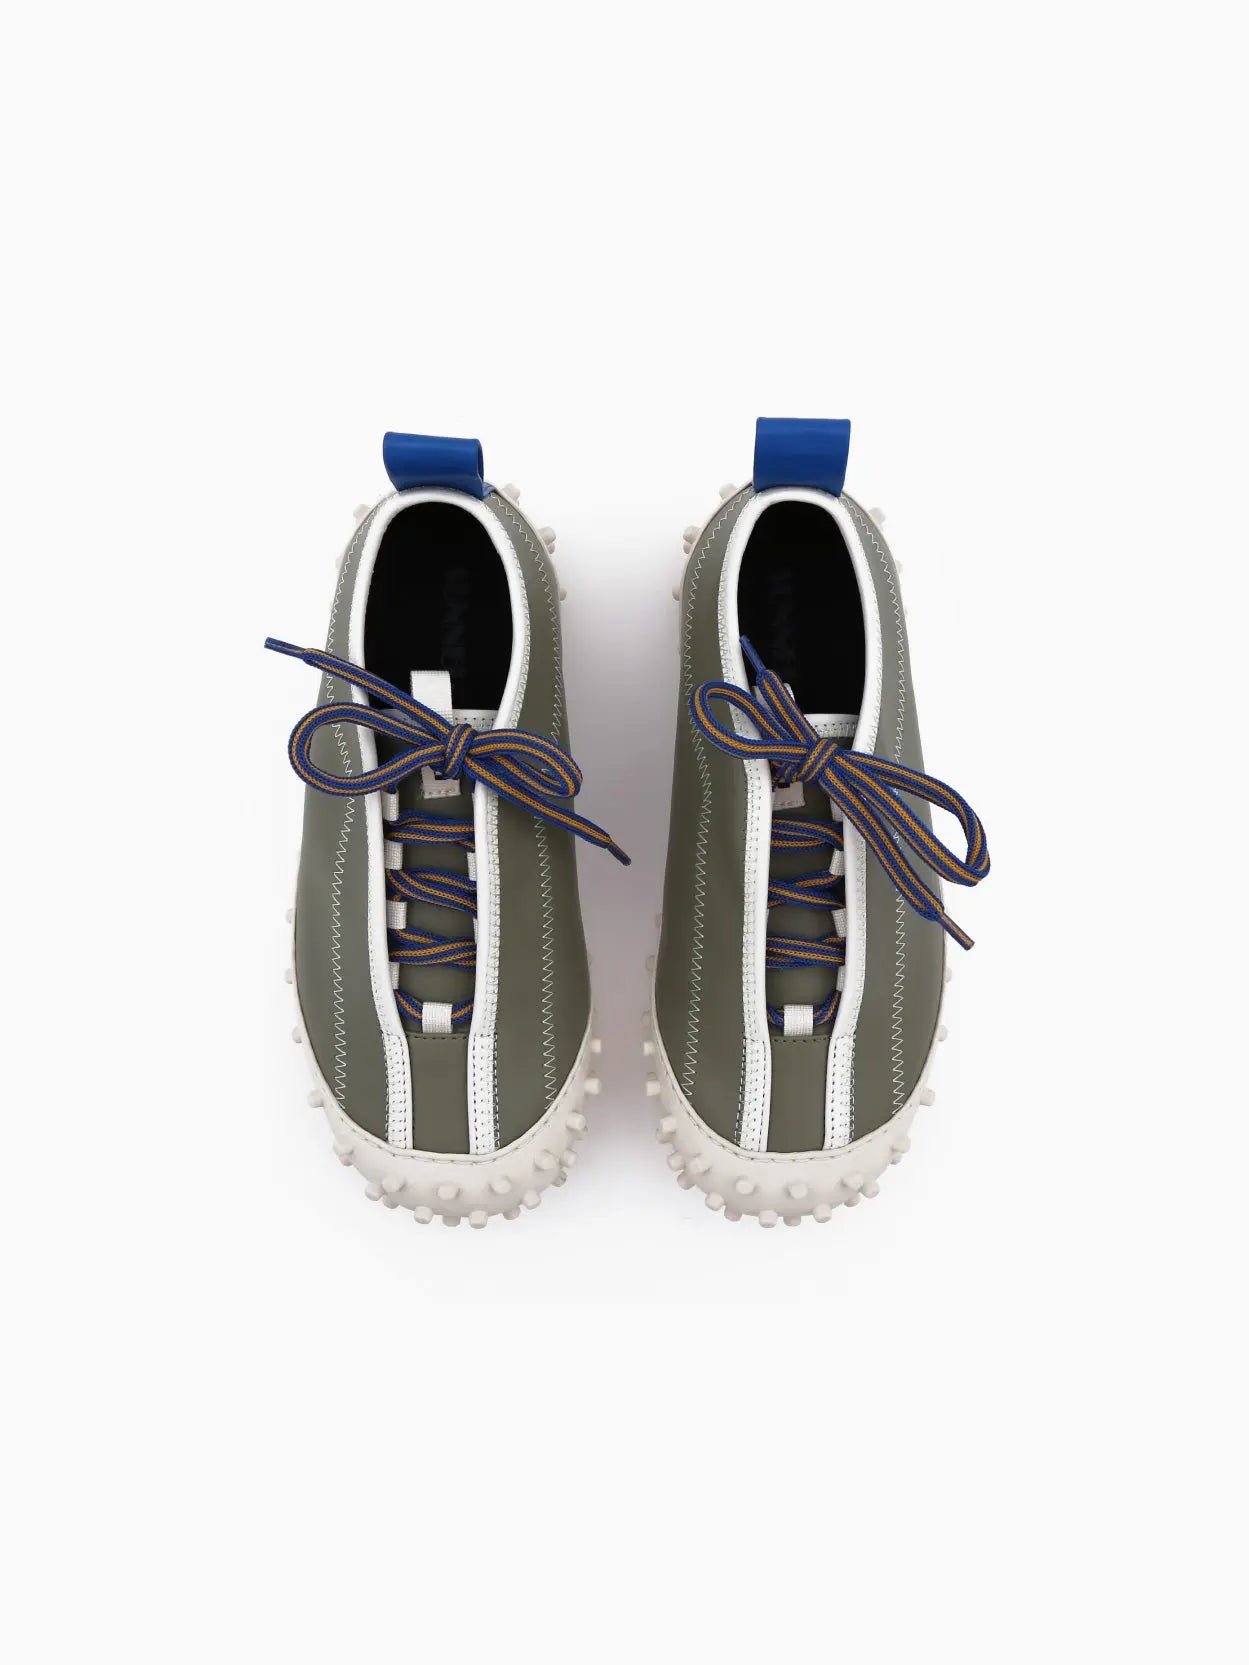 A single, stylish slip-on shoe with a gray and white color scheme and a blue heel tab. Available at Bassalstore, the Sunnei 1000 Chiodi Trainers Military Green features a unique, textured white sole with numerous round, prominent grips for enhanced traction. The lace has a colorful pattern and is tied neatly on top.